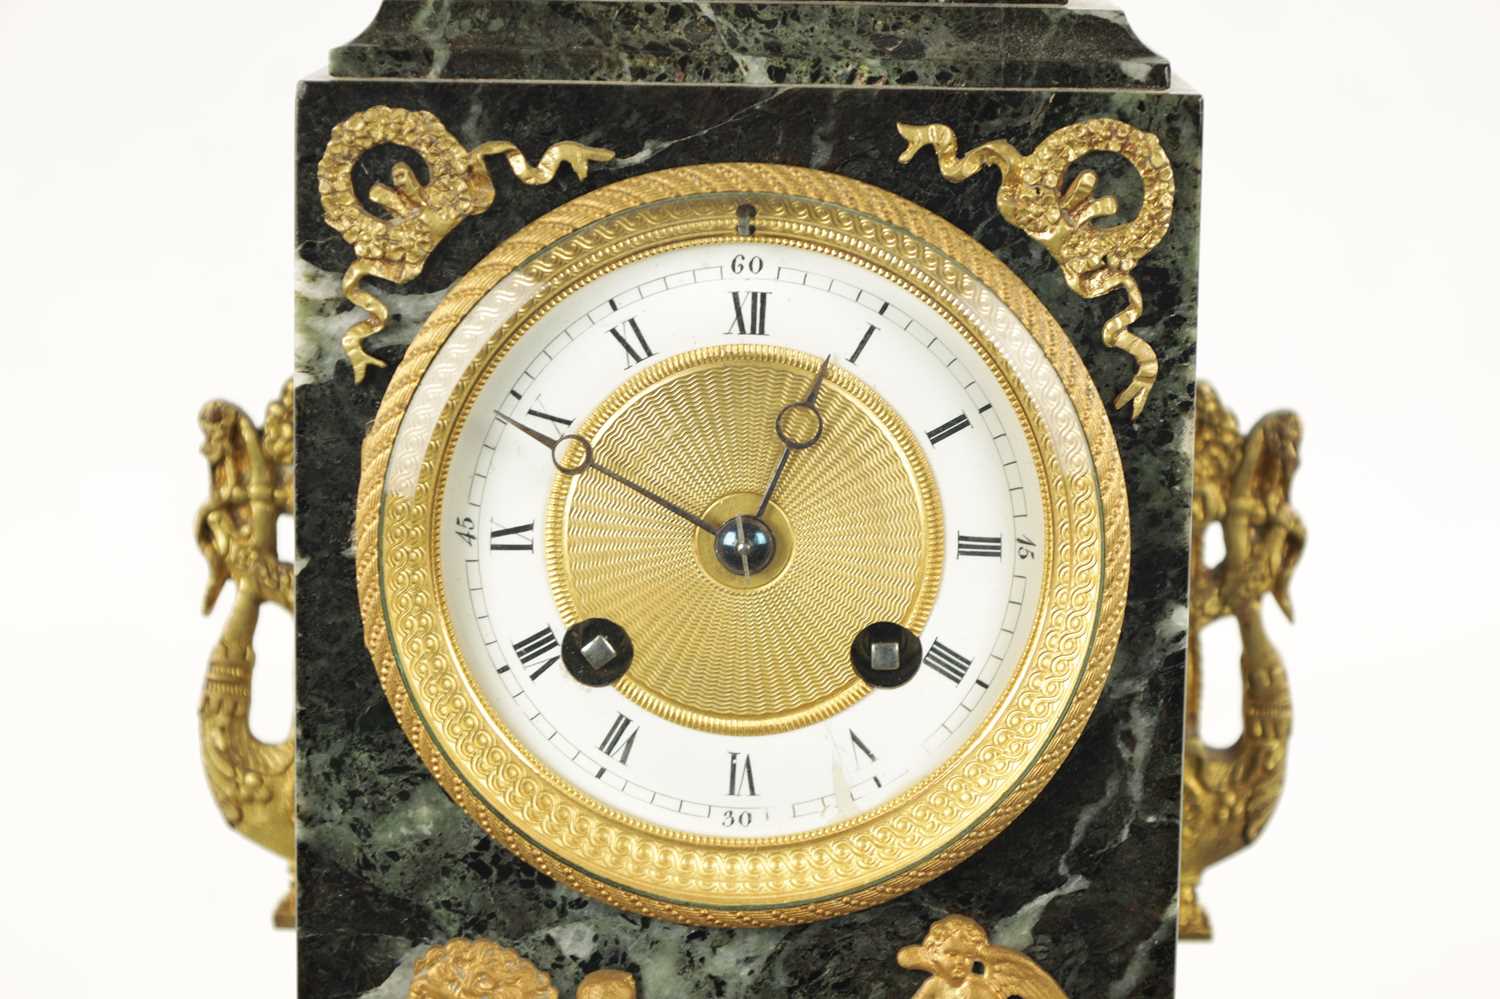 A LATE 19TH CENTURY FRENCH ANTICO VERDE MARBLE, BRONZE AND ORMOLU MANTEL CLOCK - Image 4 of 12